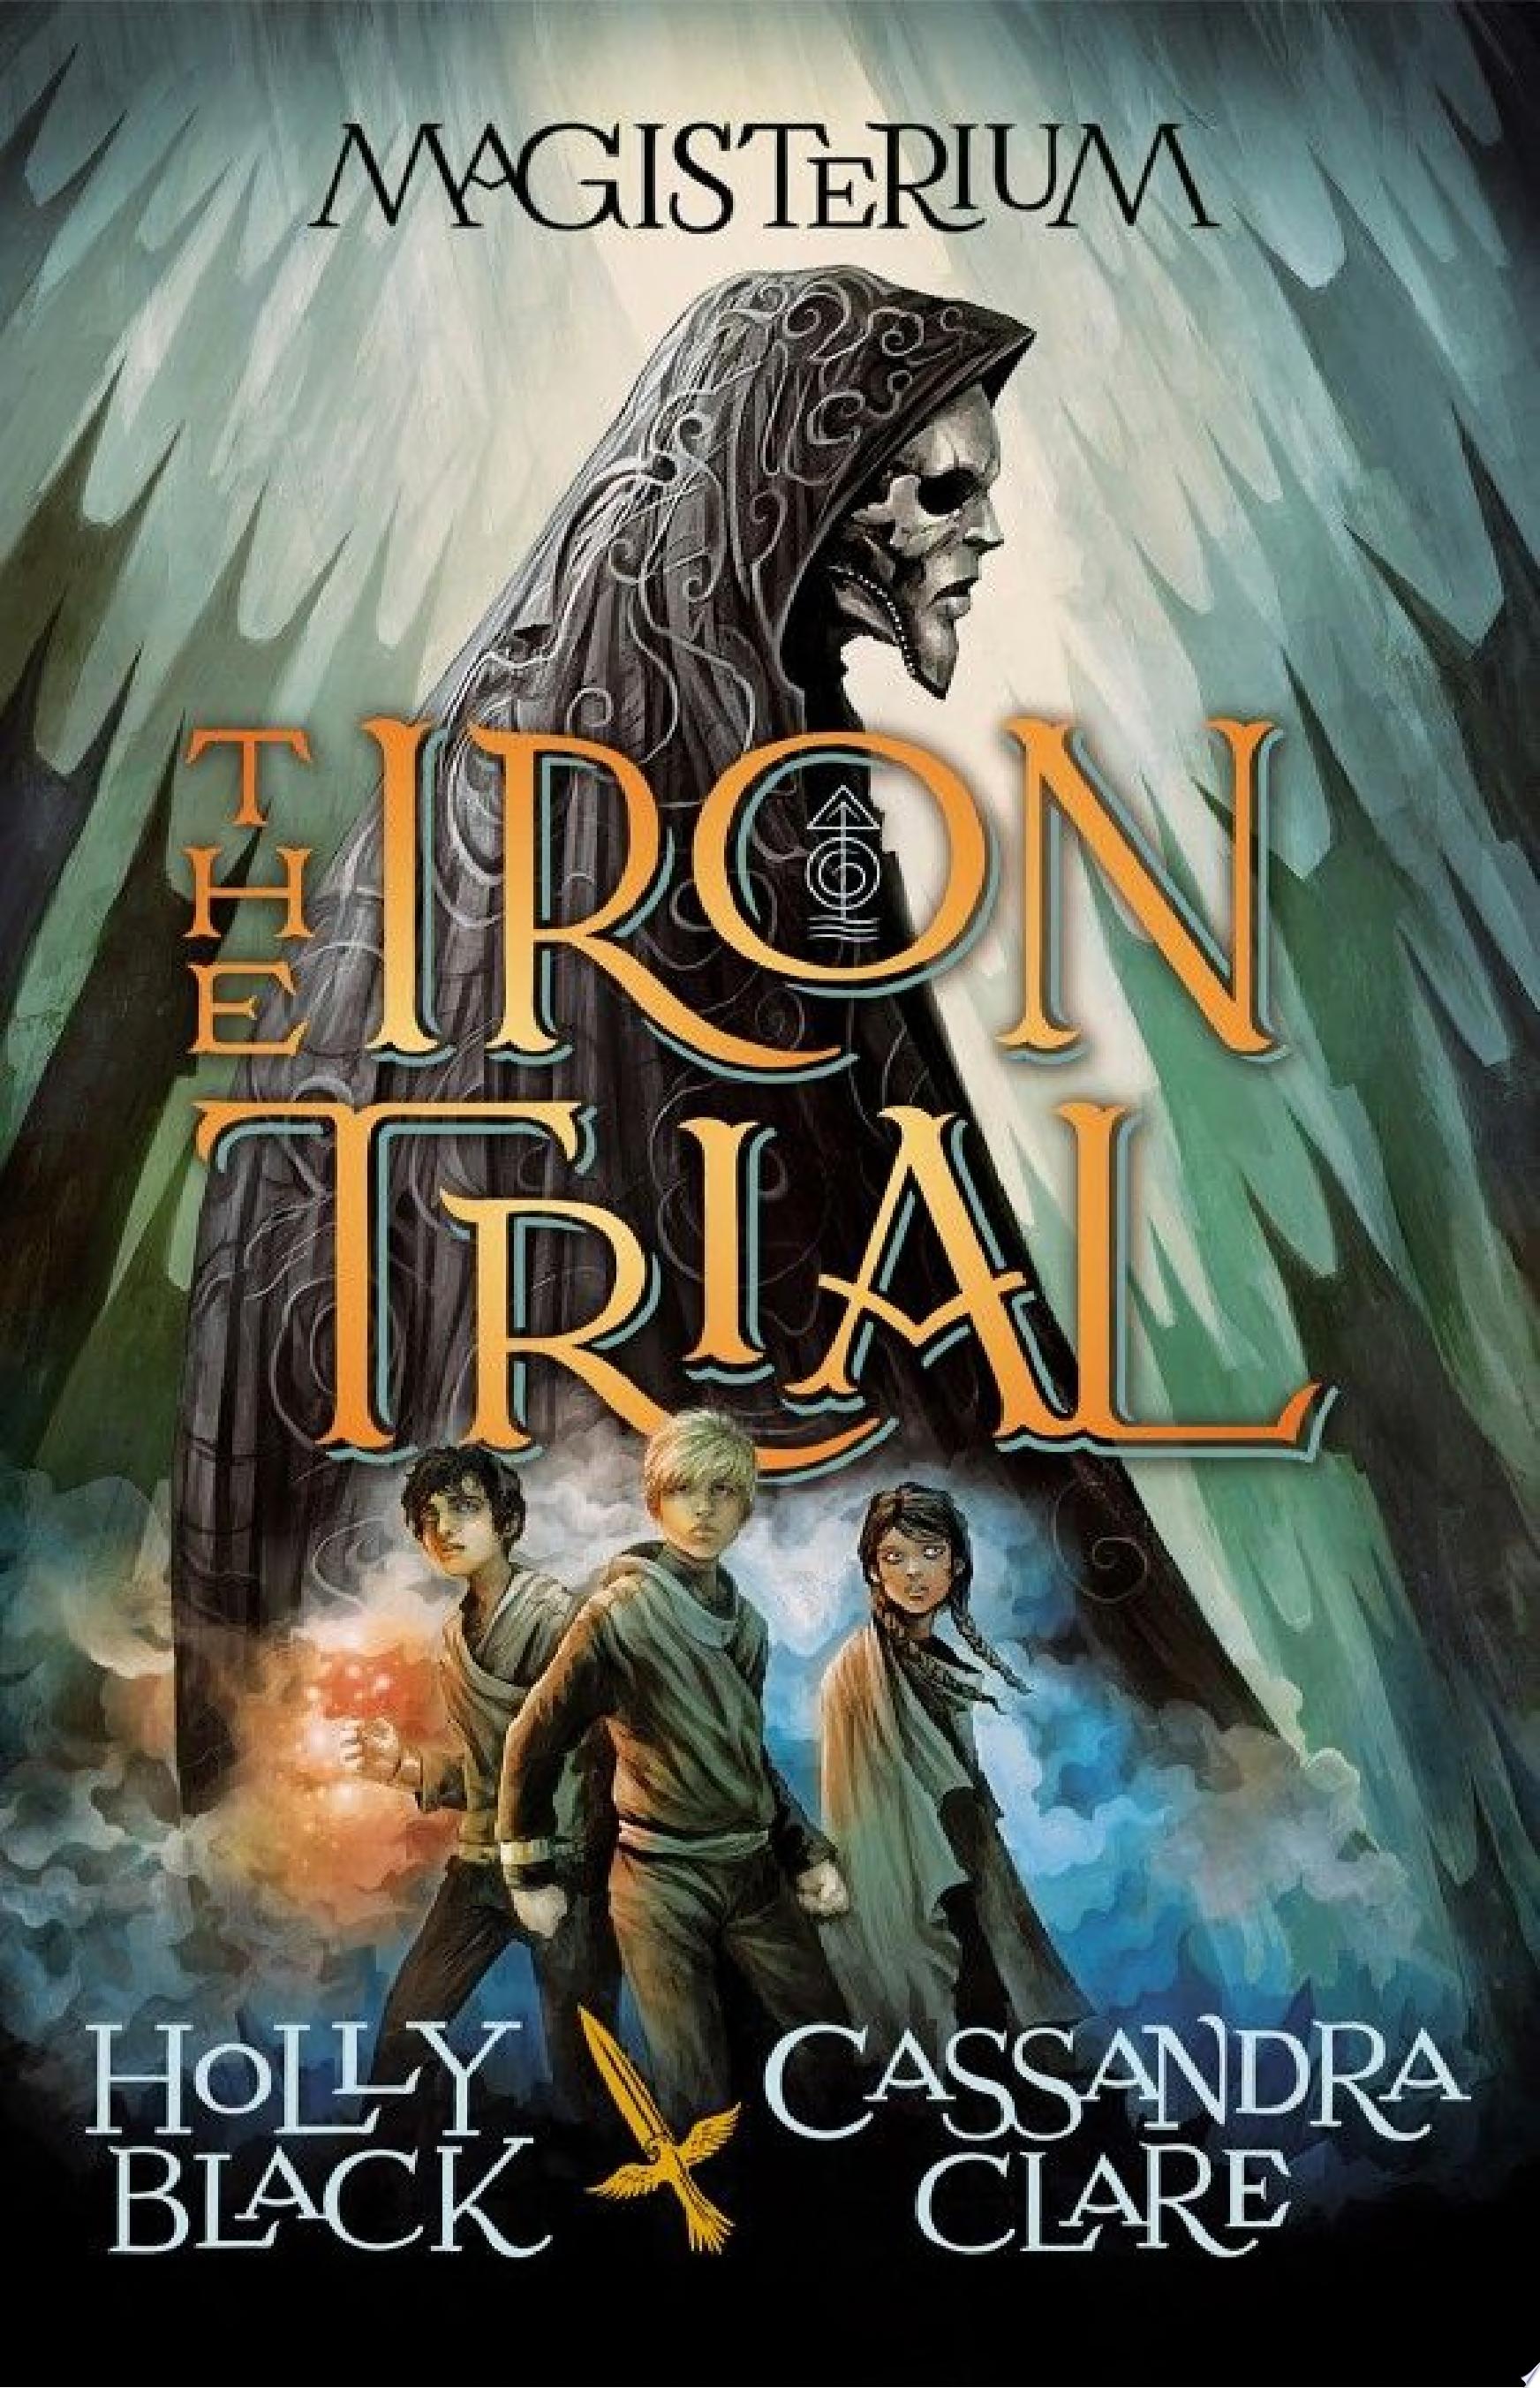 Image for "The Iron Trial (Magisterium #1)"